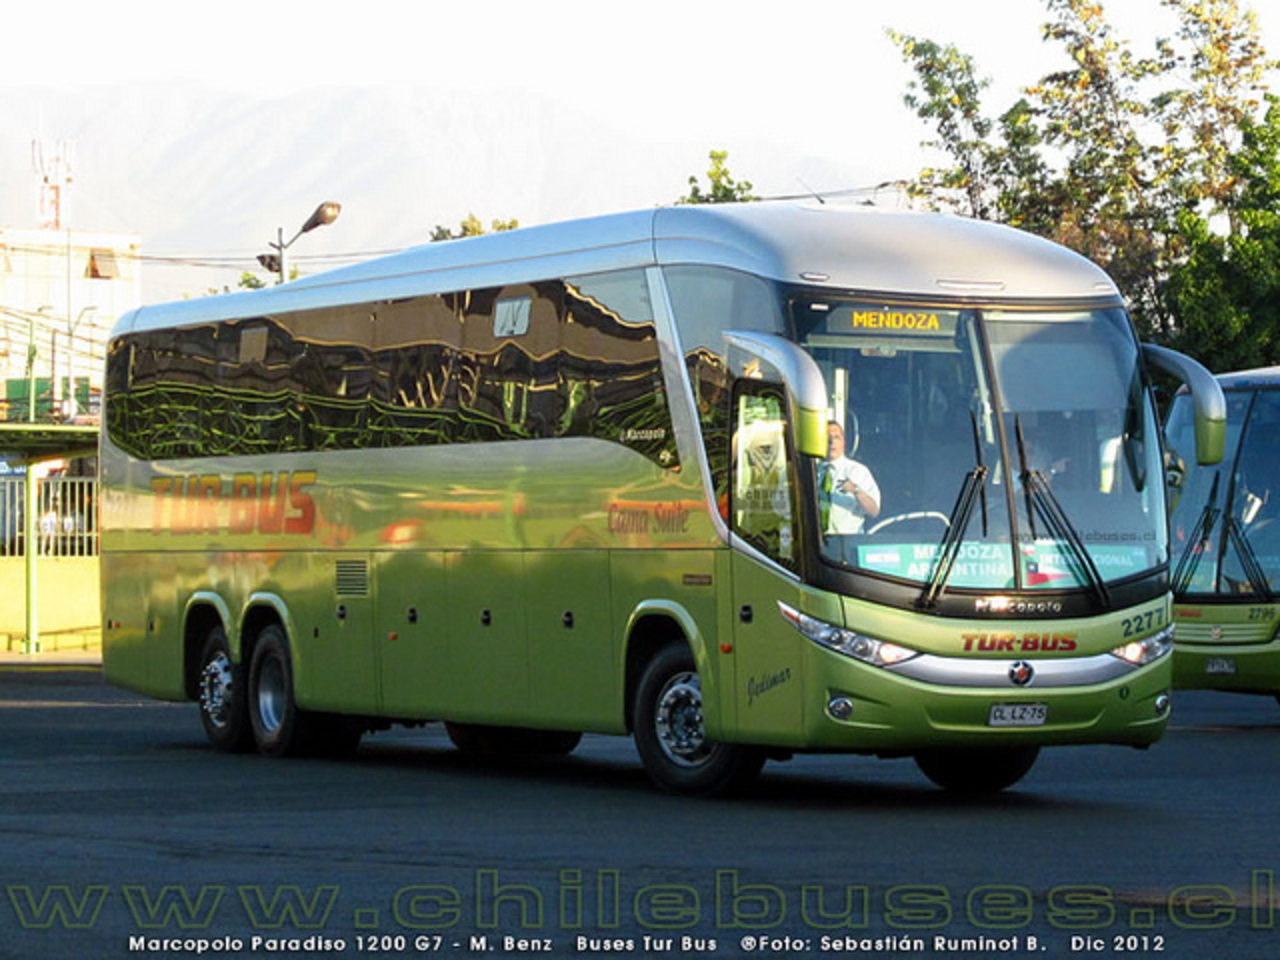 Marcopolo Paradiso 1200 G7/M.Benz/Buses Tur Bus | Flickr - Photo ...